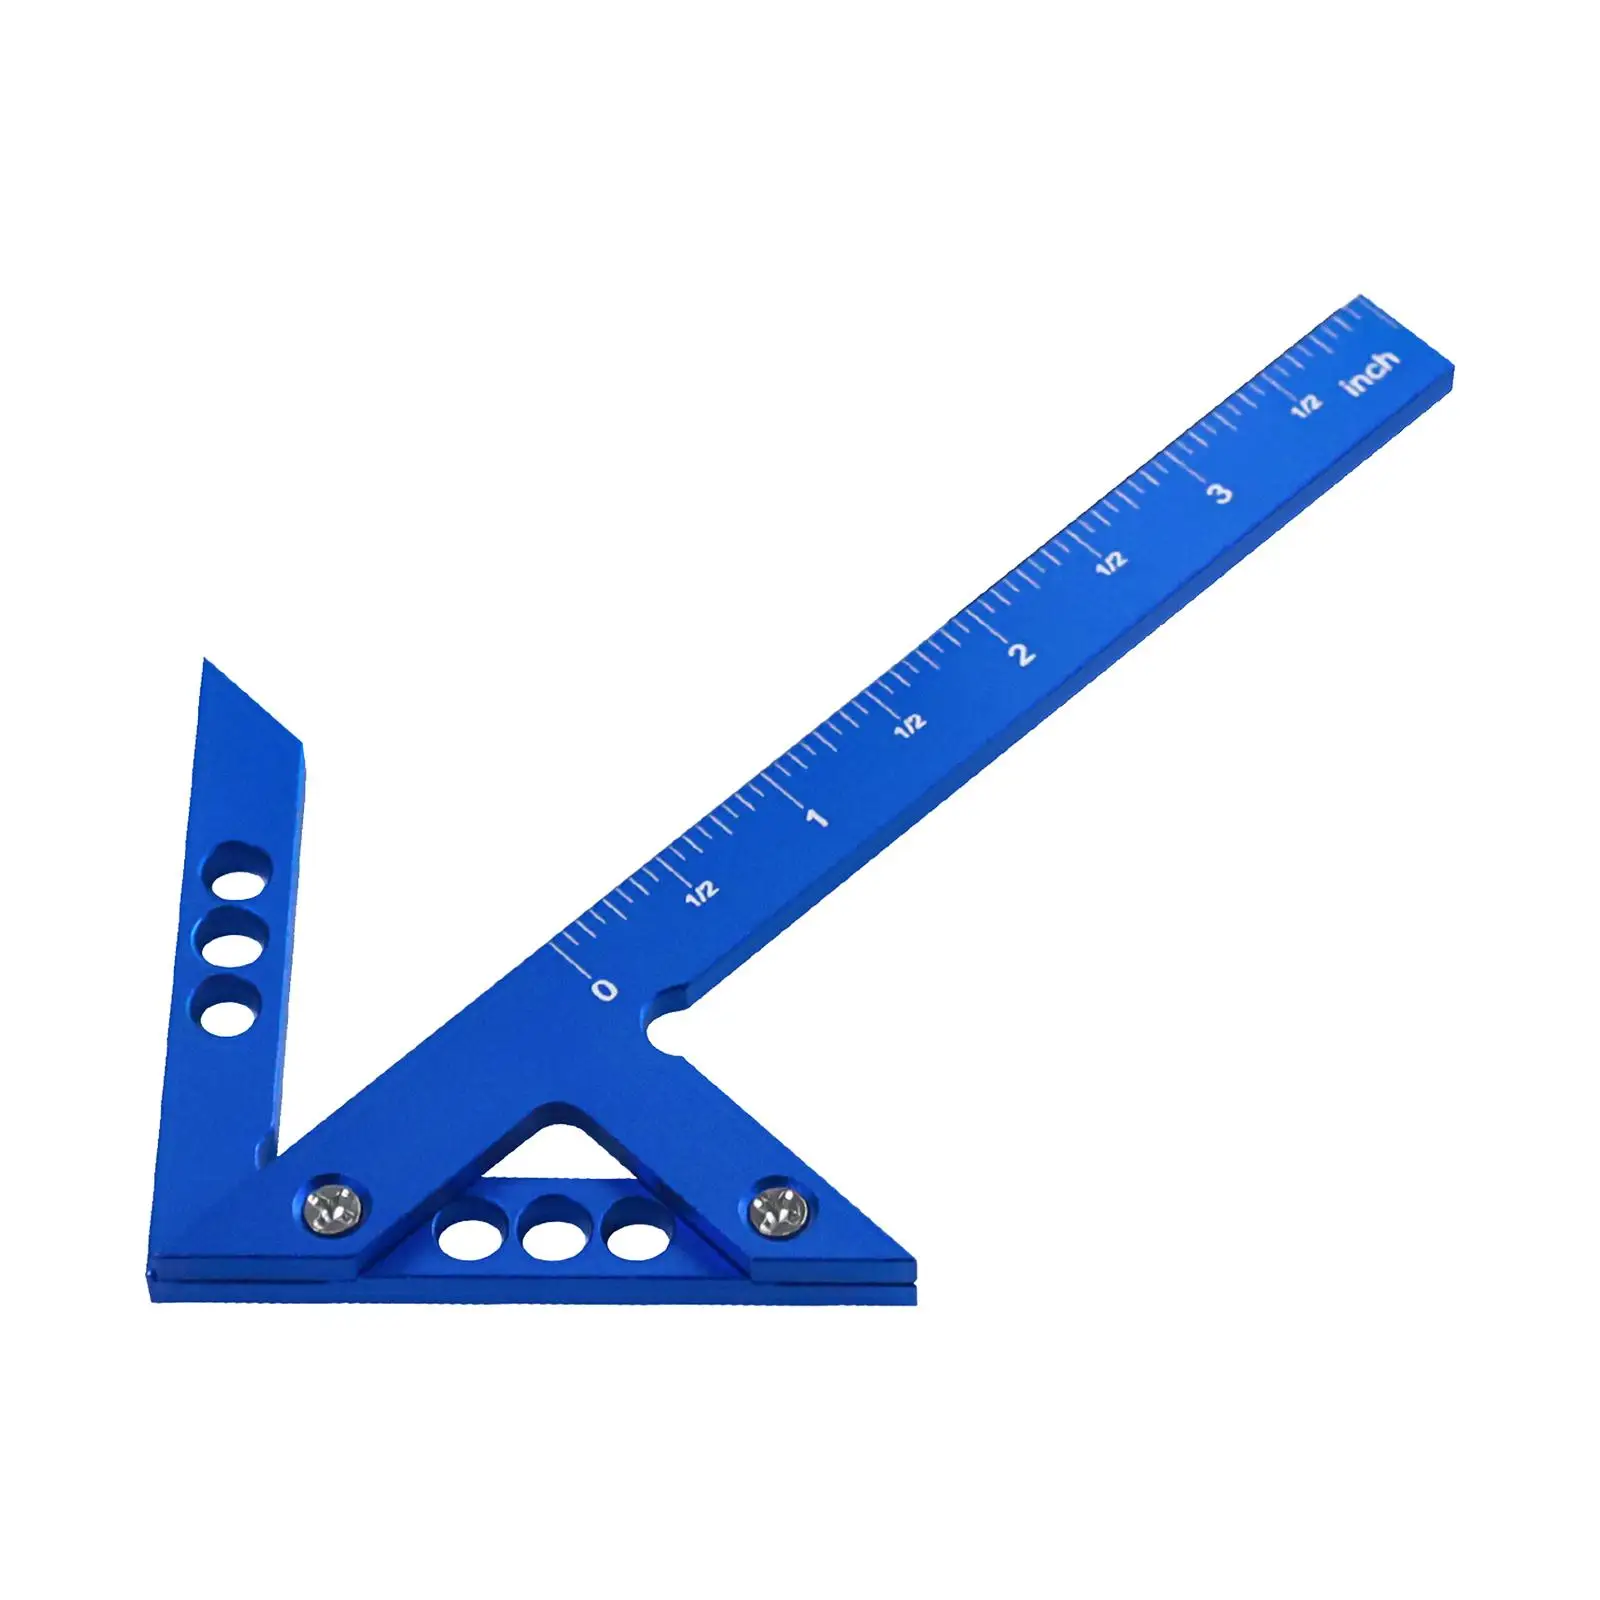 Center Measuring Tool Woodworking Angle Ruler Square Protractor Aluminum Alloy Circle Center Finder Tool for Drawing Engineer